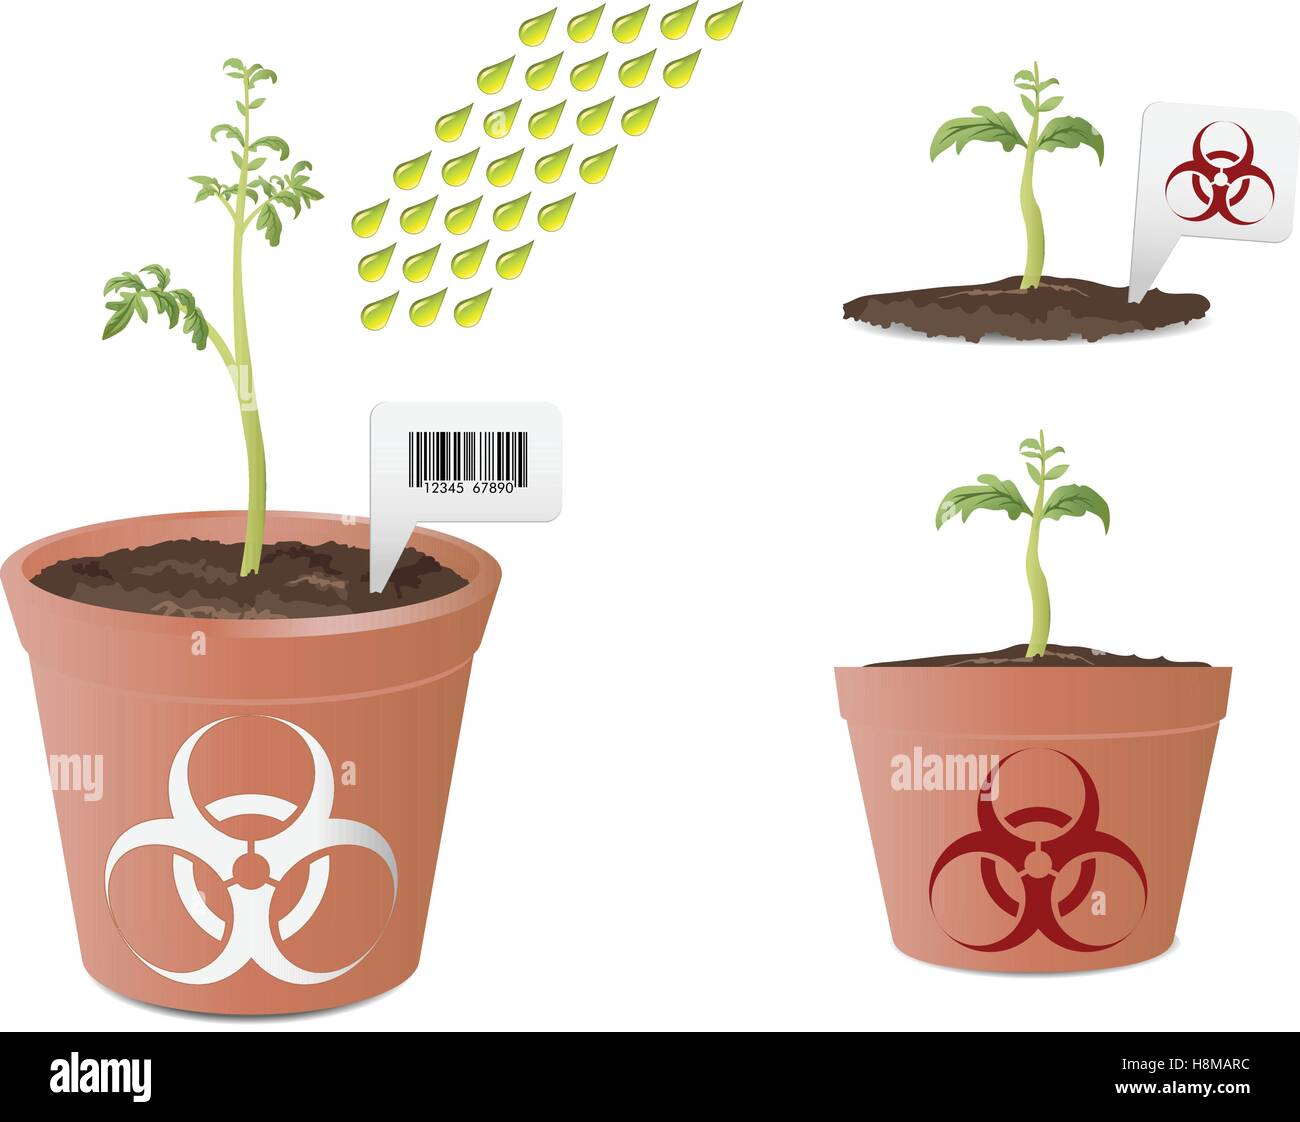 Genetically modified organism; tomato plant with bio hazard icon in pots Stock Vector